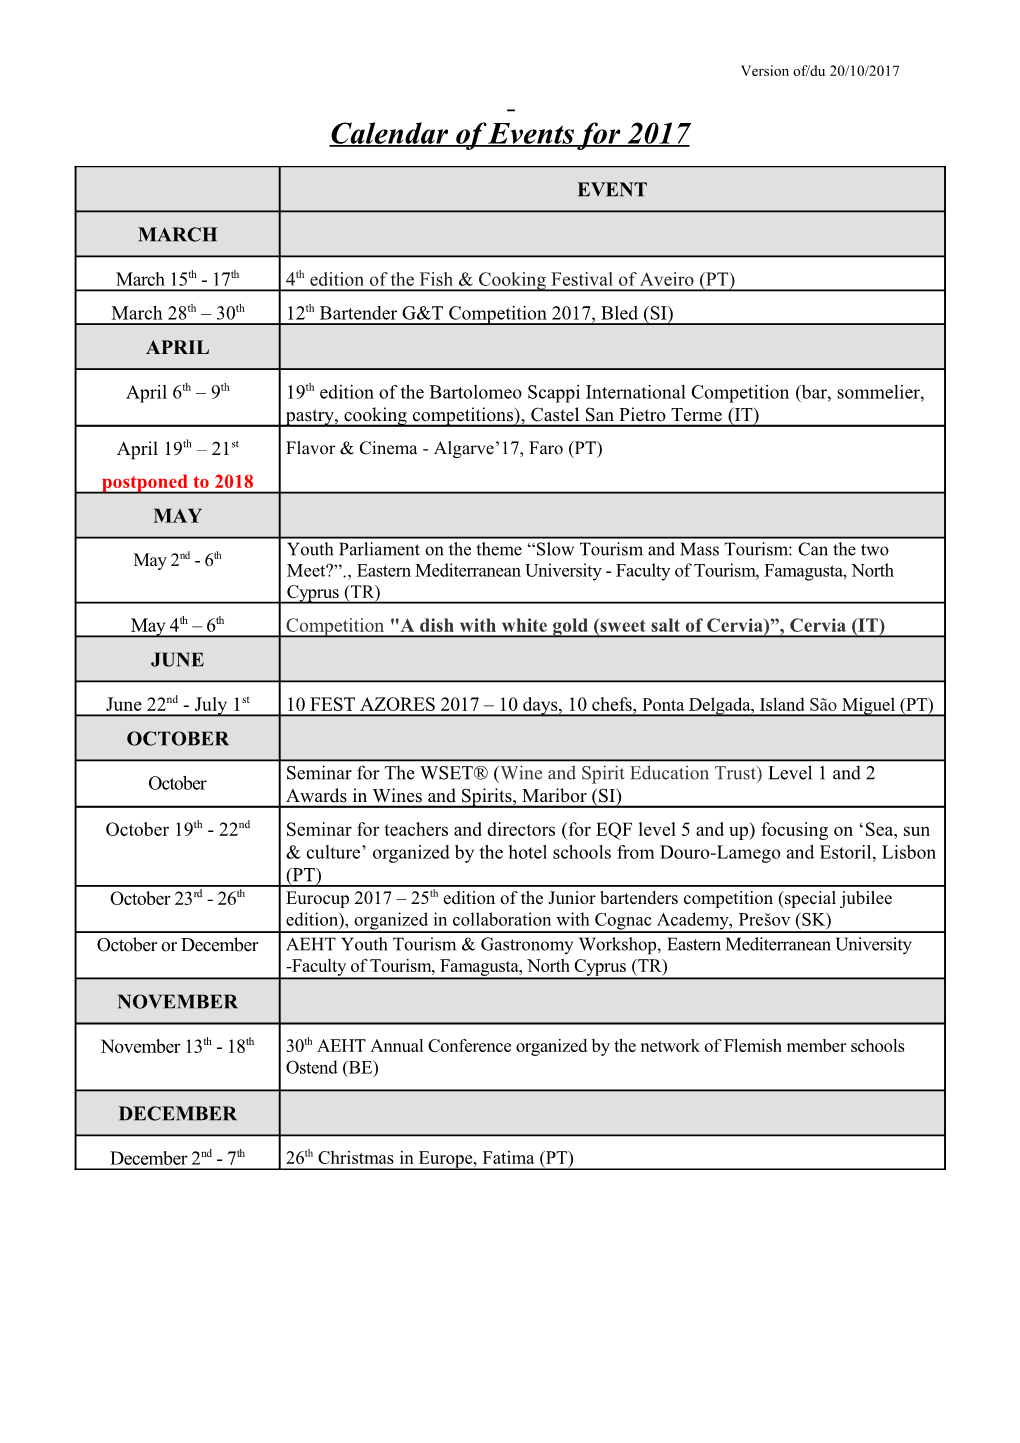 Calendar of Events for 2009 (Draft Version)